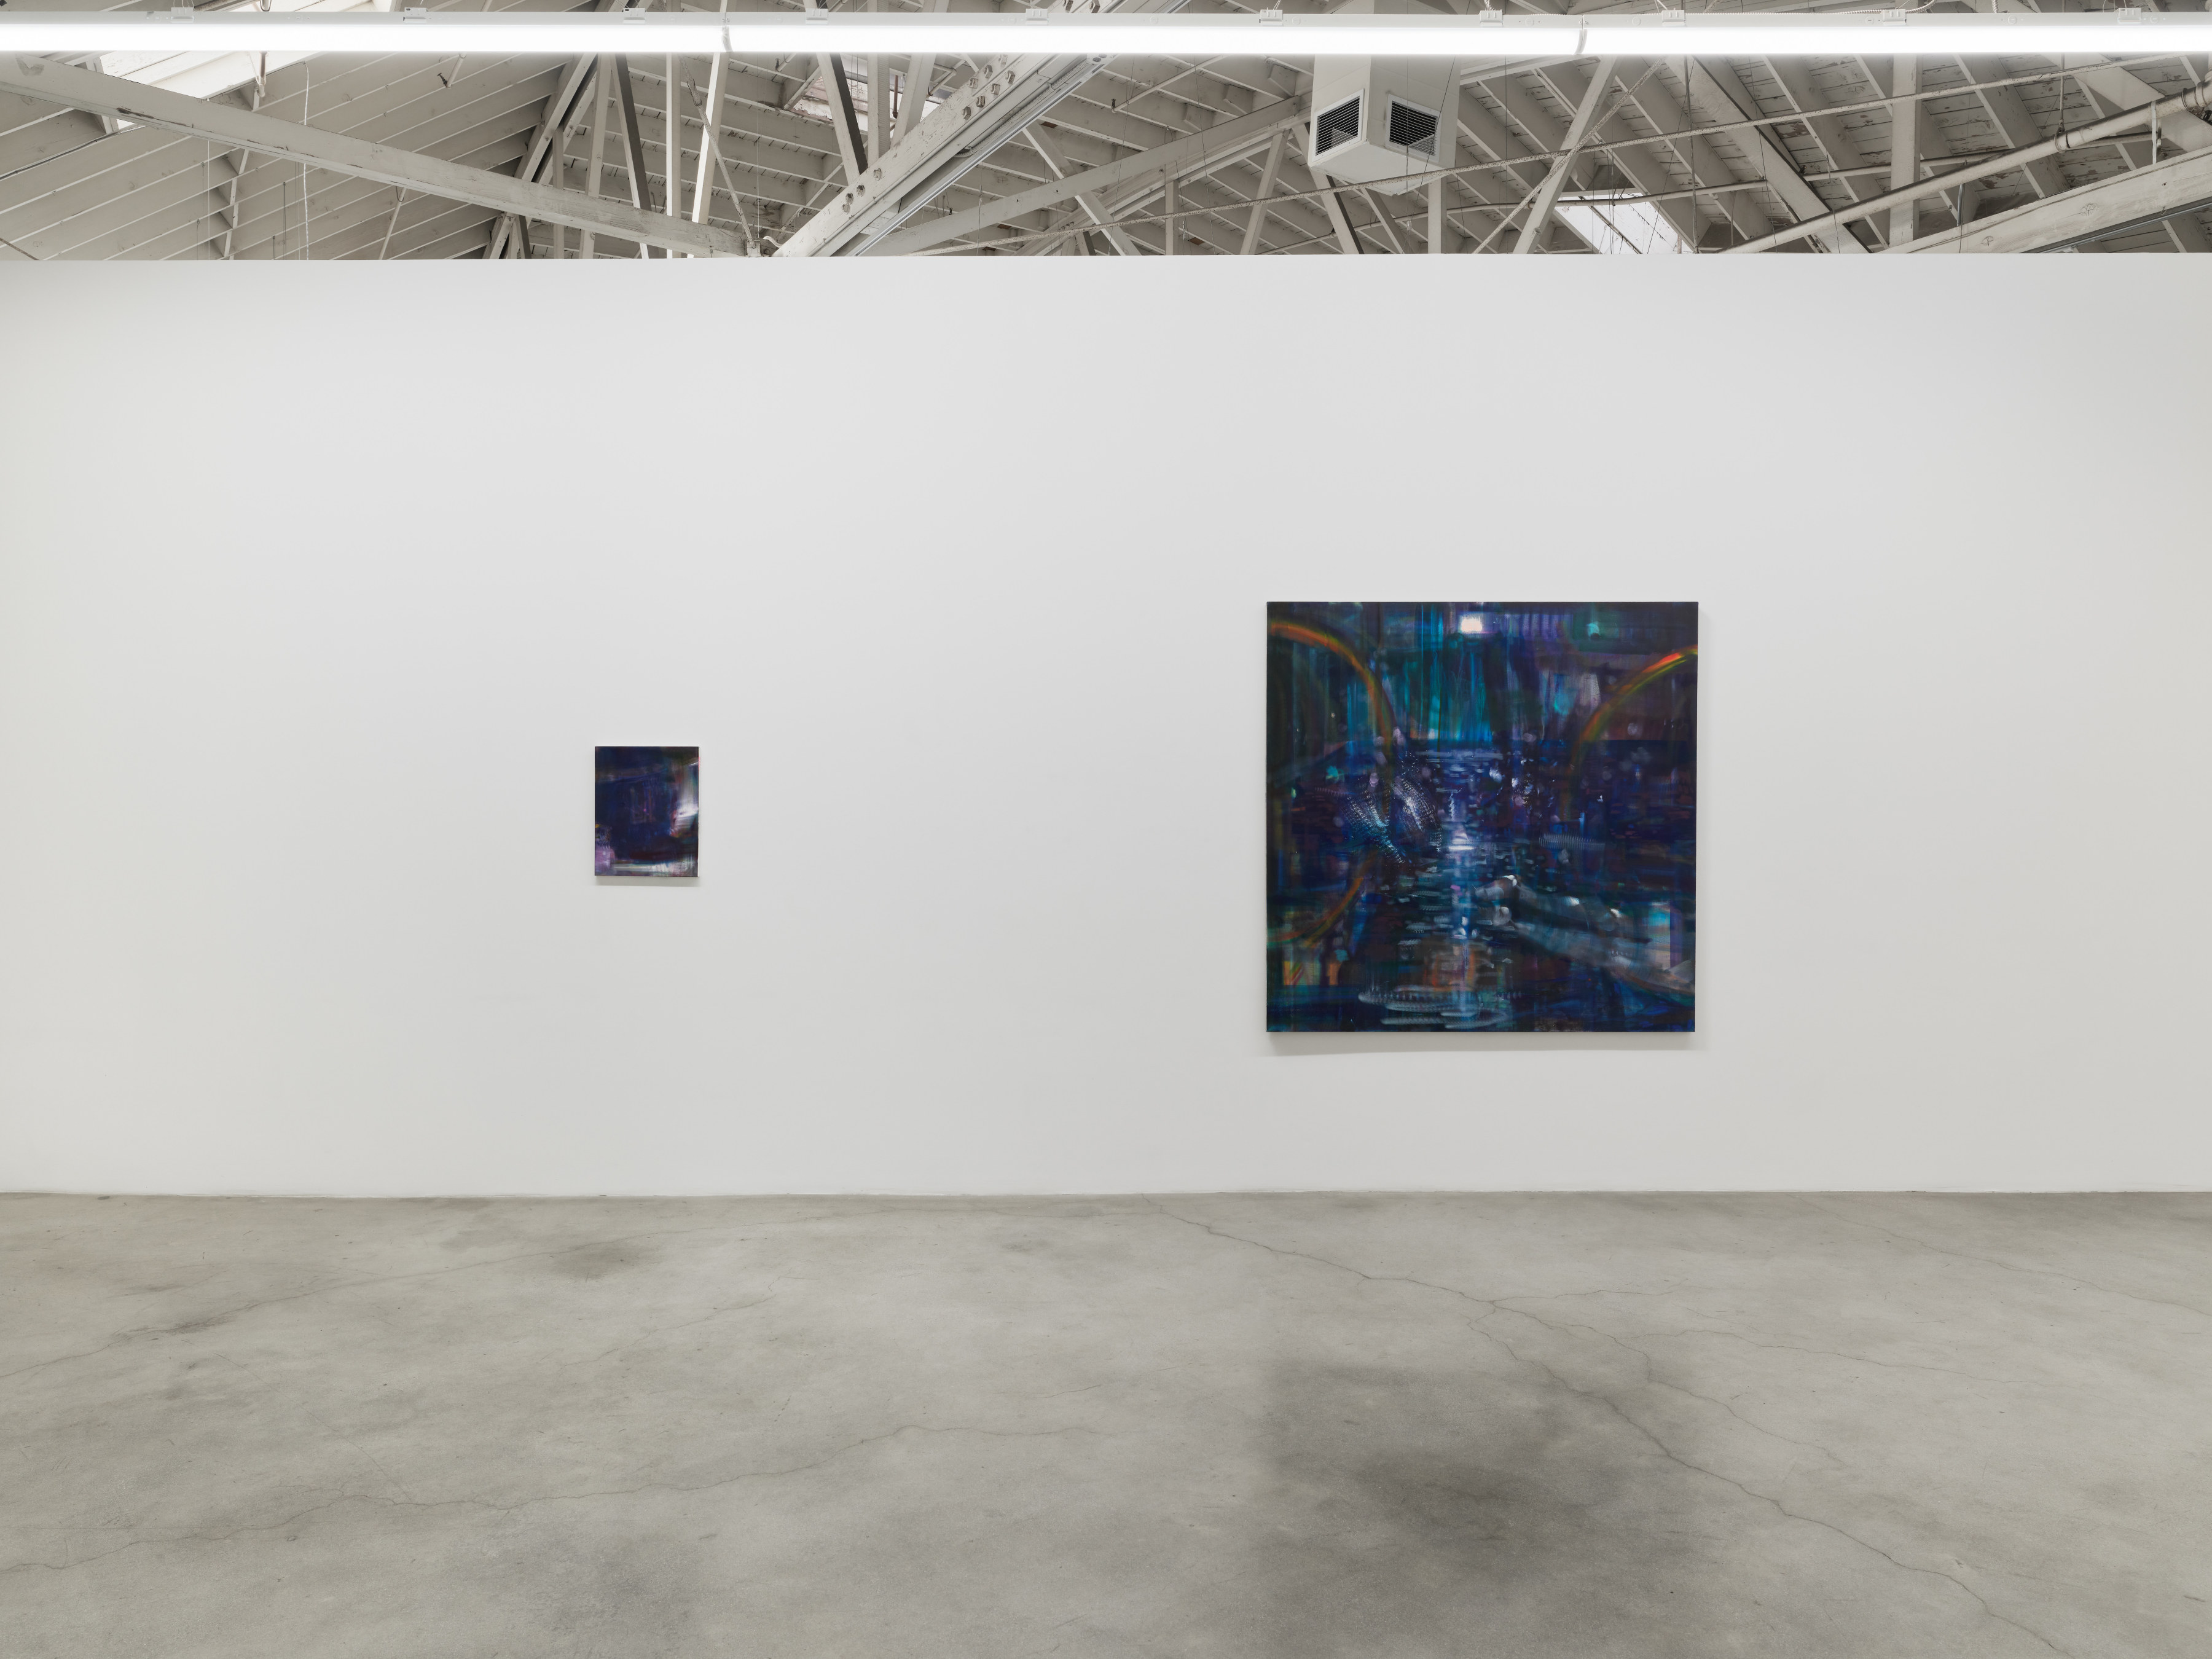 Installation view of Ben Tong's "The Violet Hour" at Night Gallery